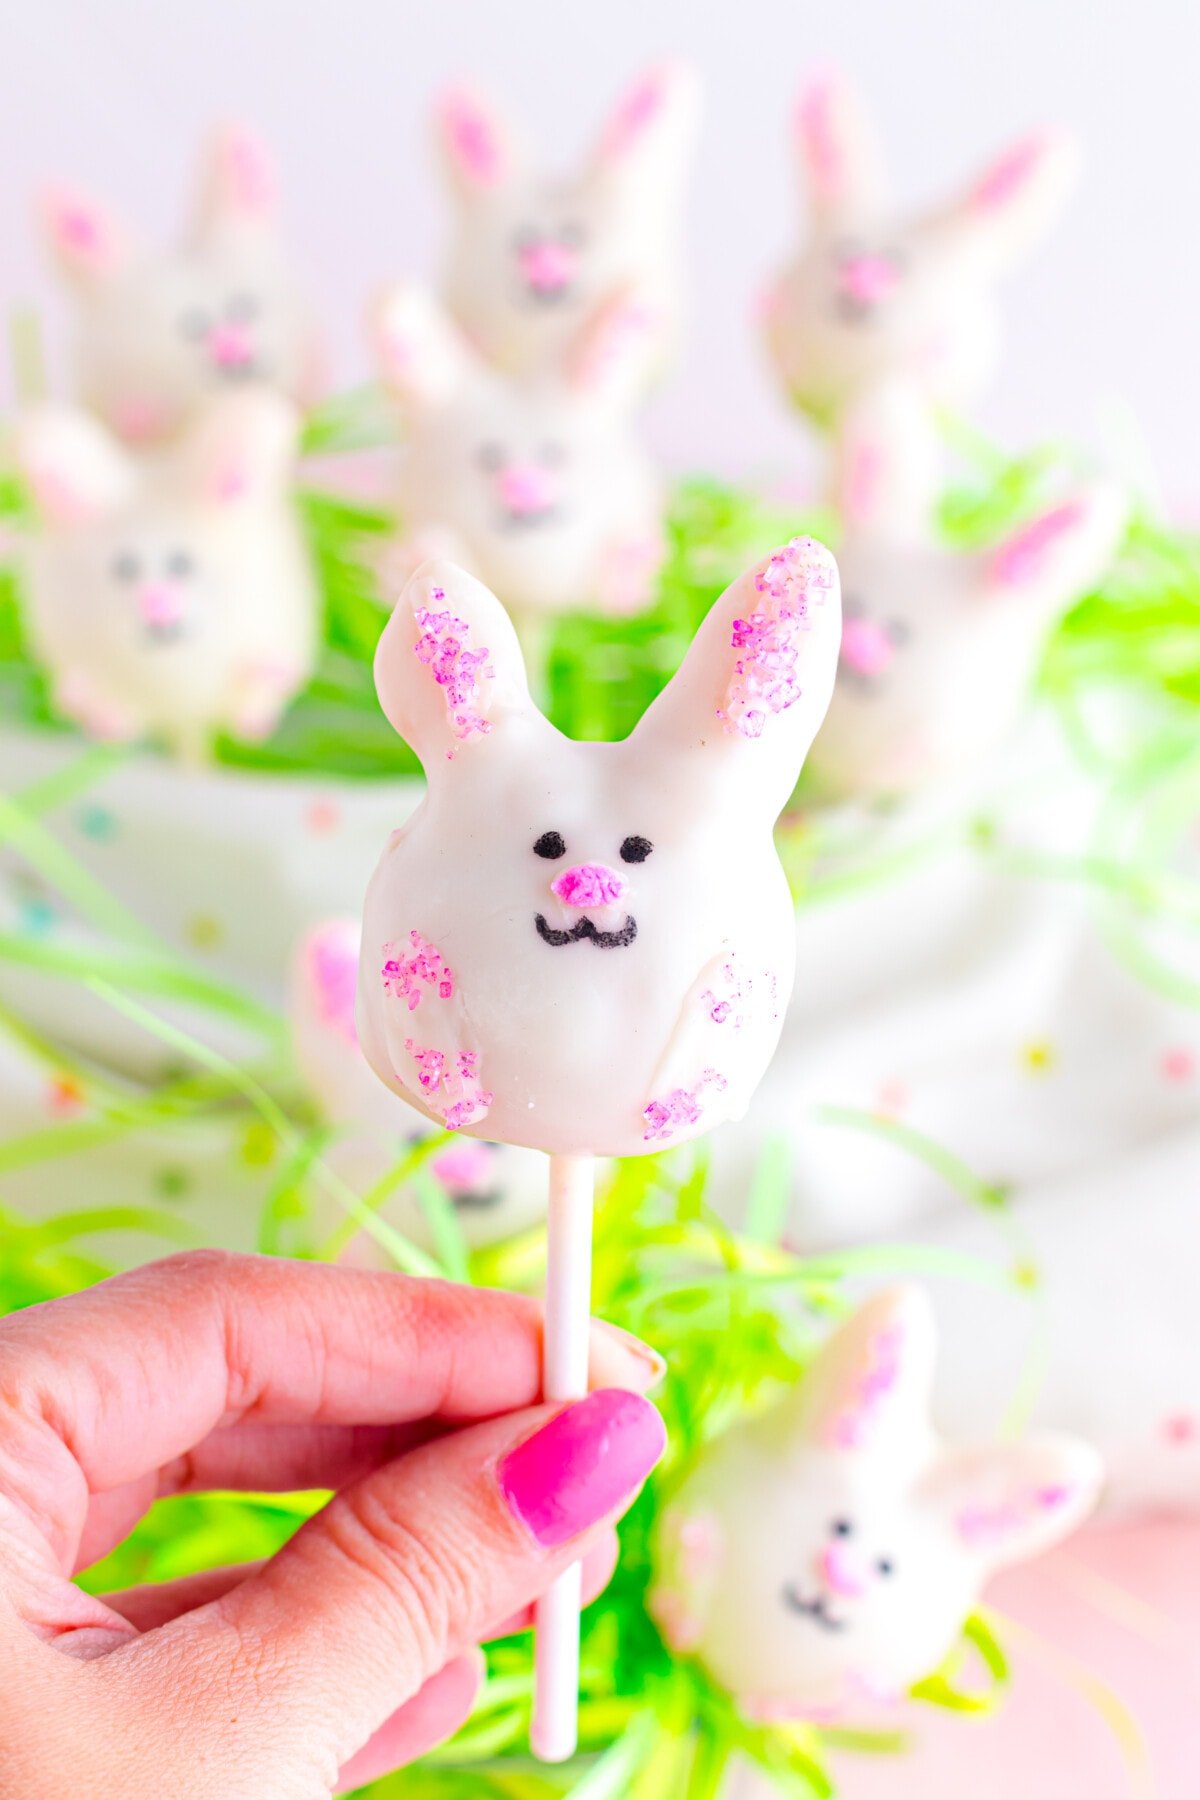 A hand holding one of the Easter Cake Pops.